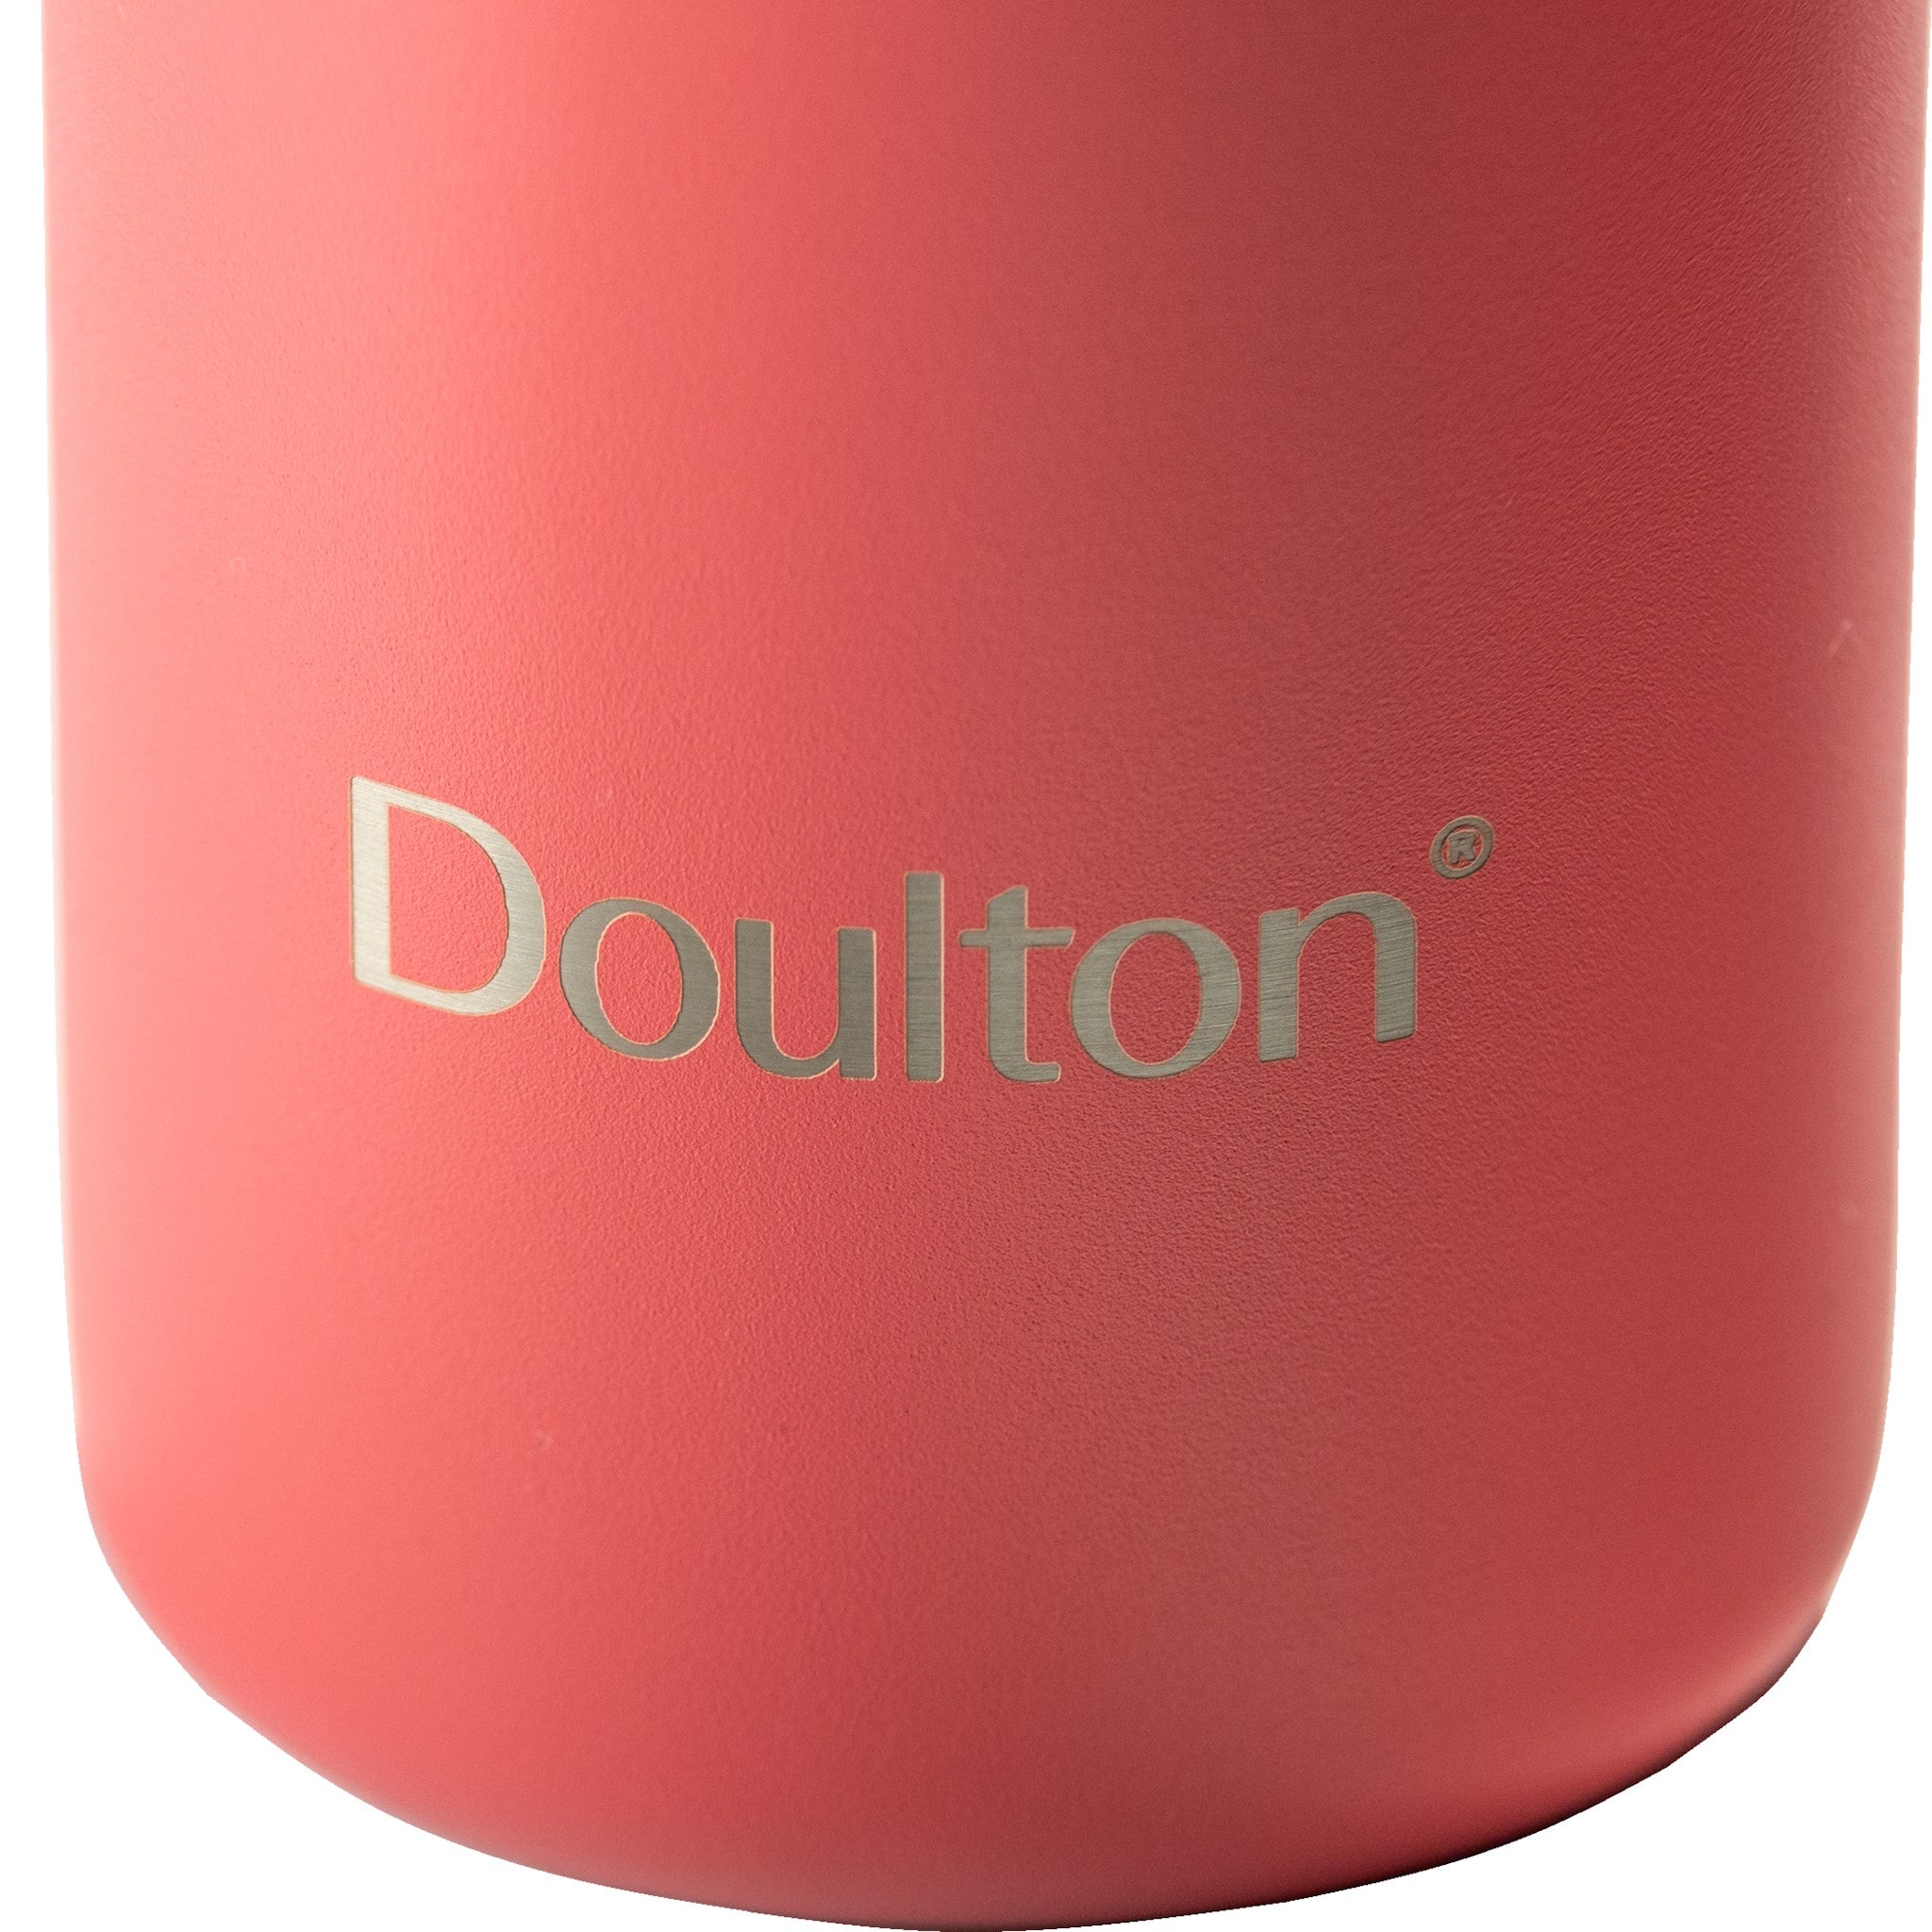 Doulton Taste 2 Water Bottle with Carbon Water Filter – Doulton Water  Filters Limited